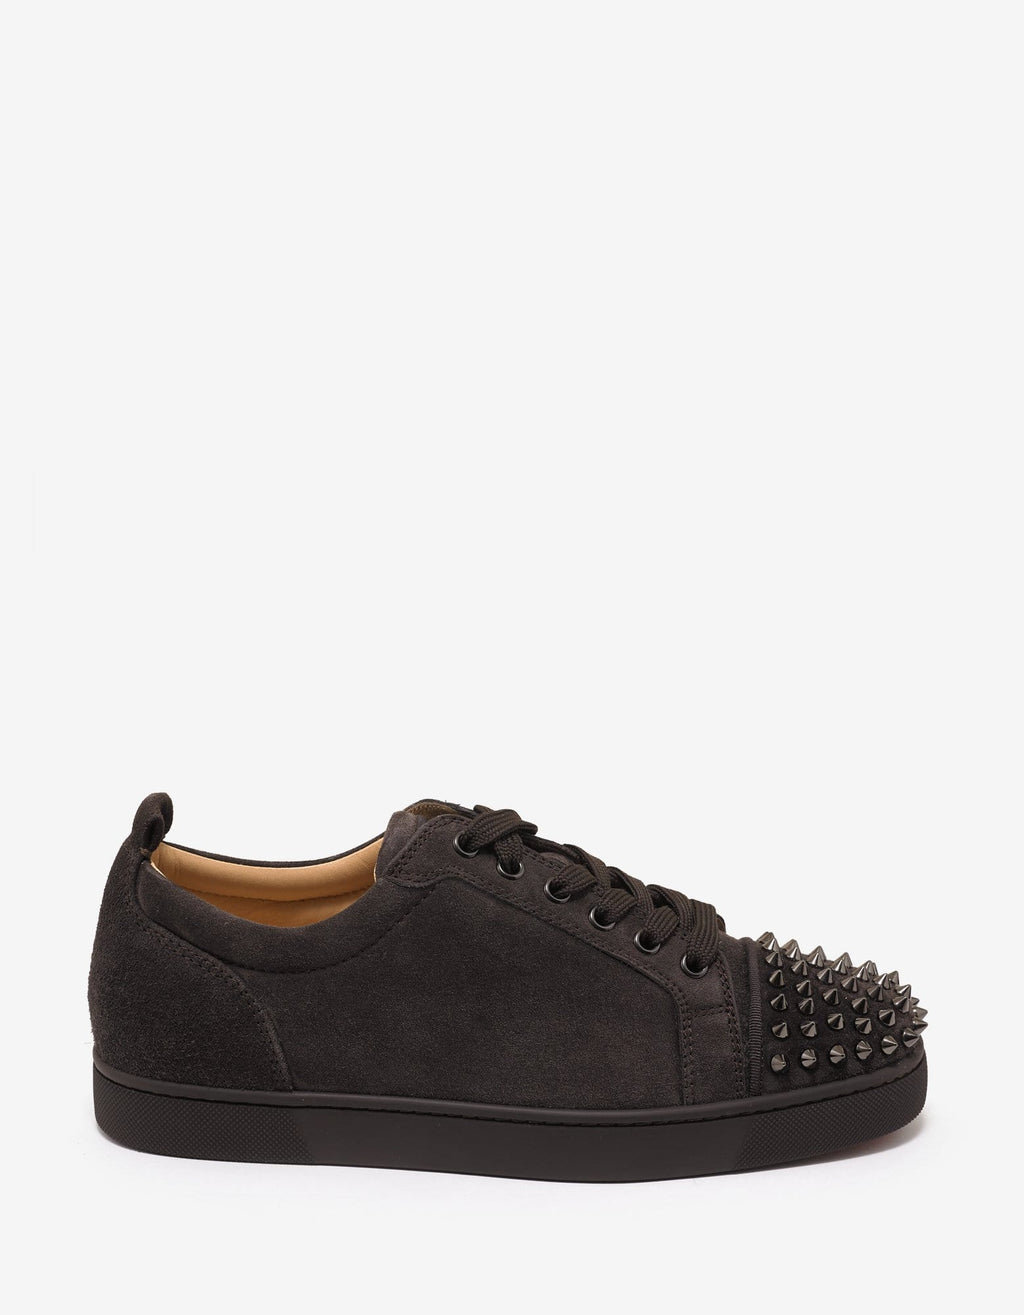 Christian Louboutin Louis Junior Spikes Flat Réglisse Brown Suede Trainers